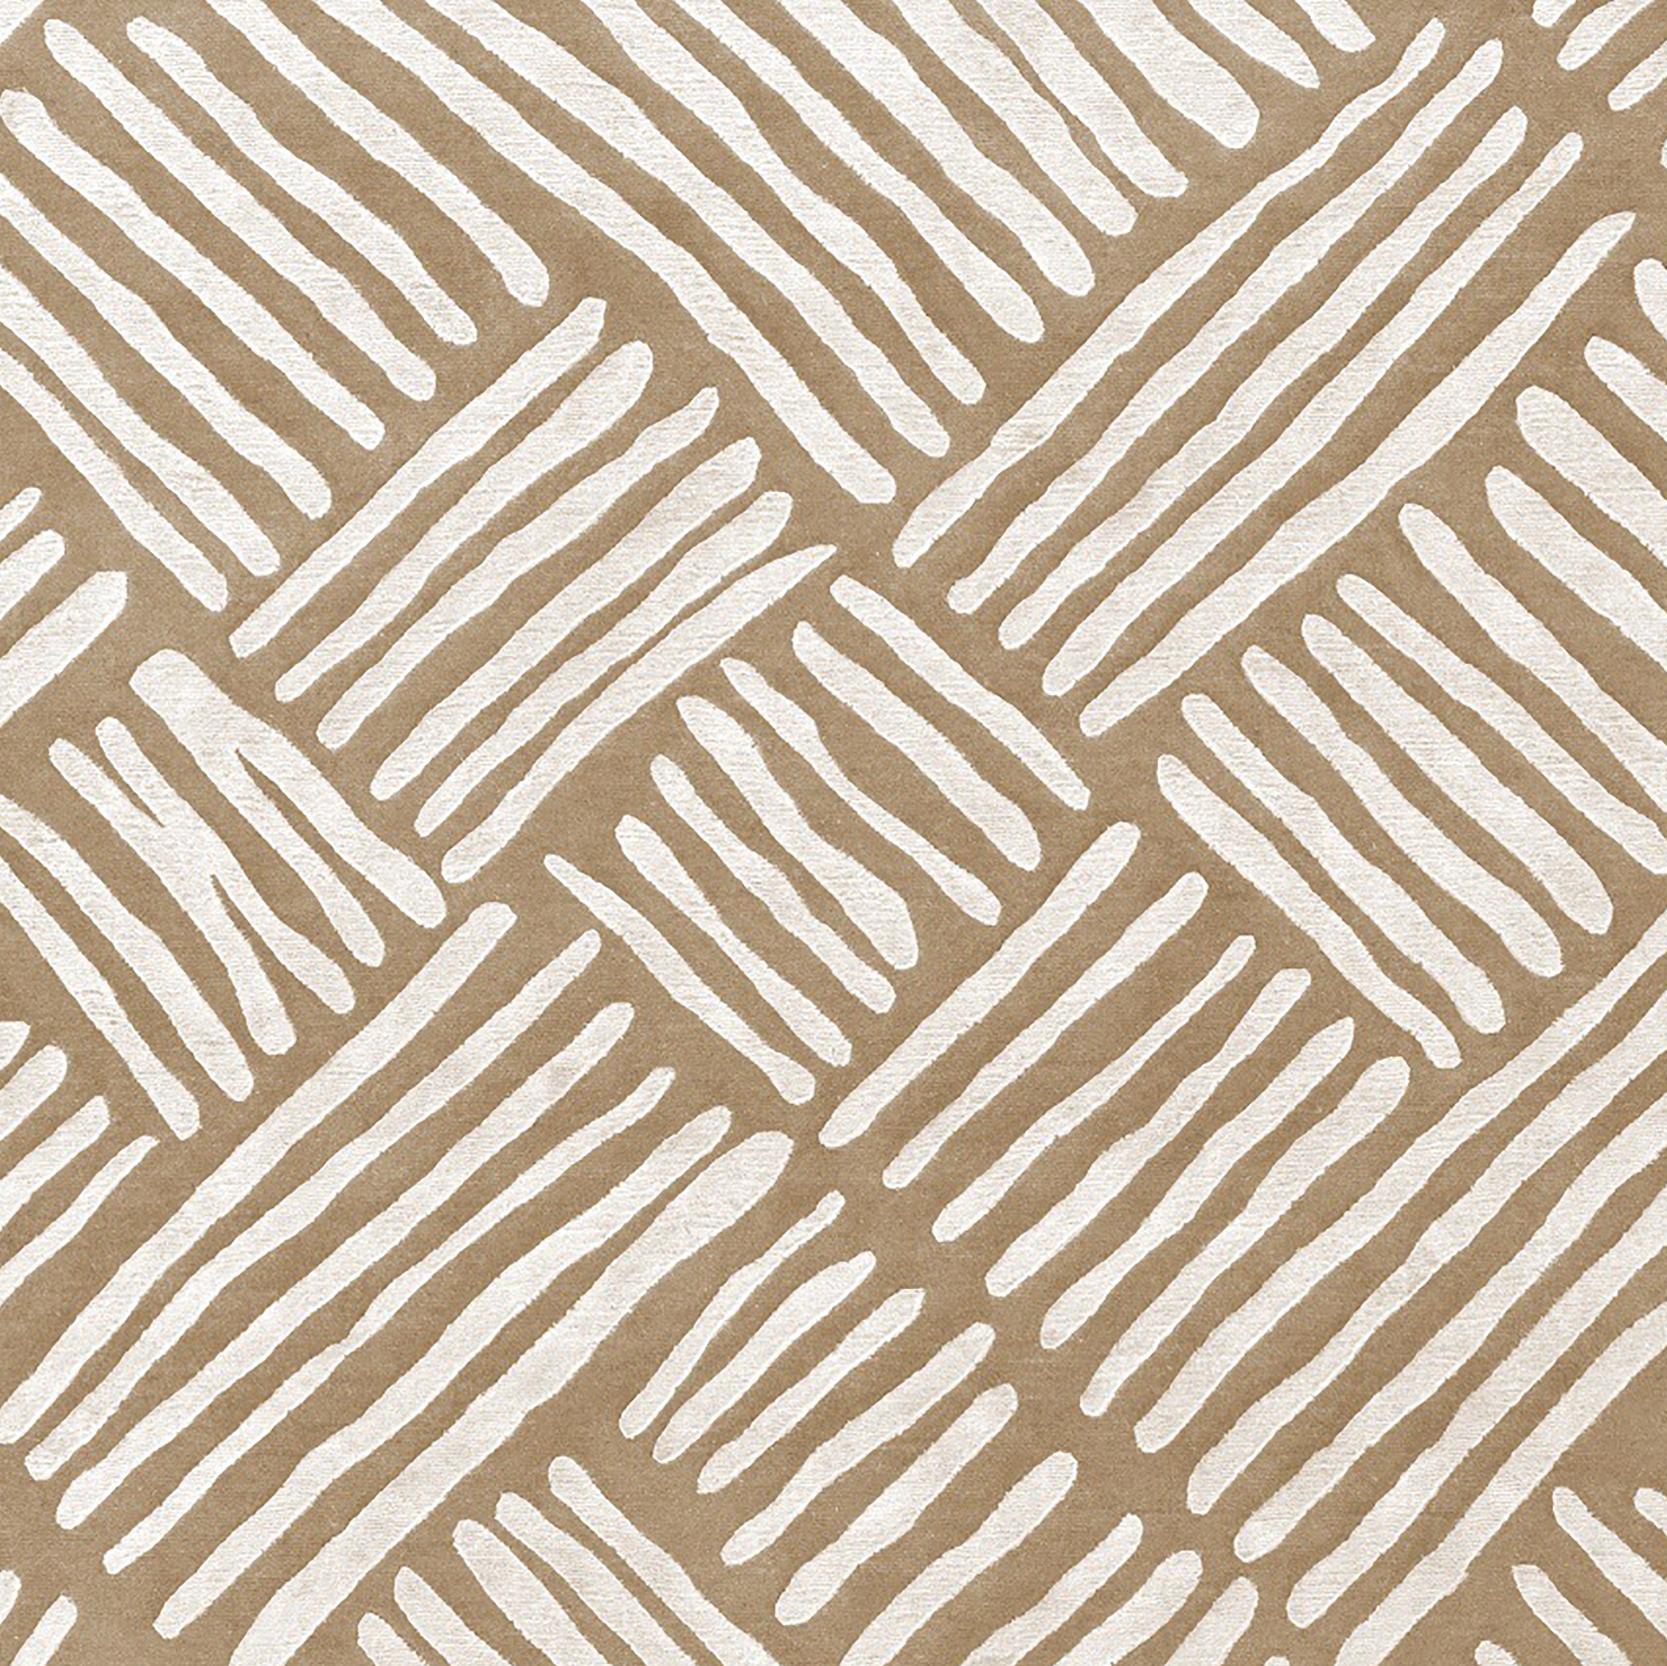 Flair rug shows how a simple set of repeated stripes may transform into something which is simple and elegant at the same time.
This rug is hand knotted in Nepal by our artisans by using 50% silk and 50% fine Himalayan wool dyed using vegetable and